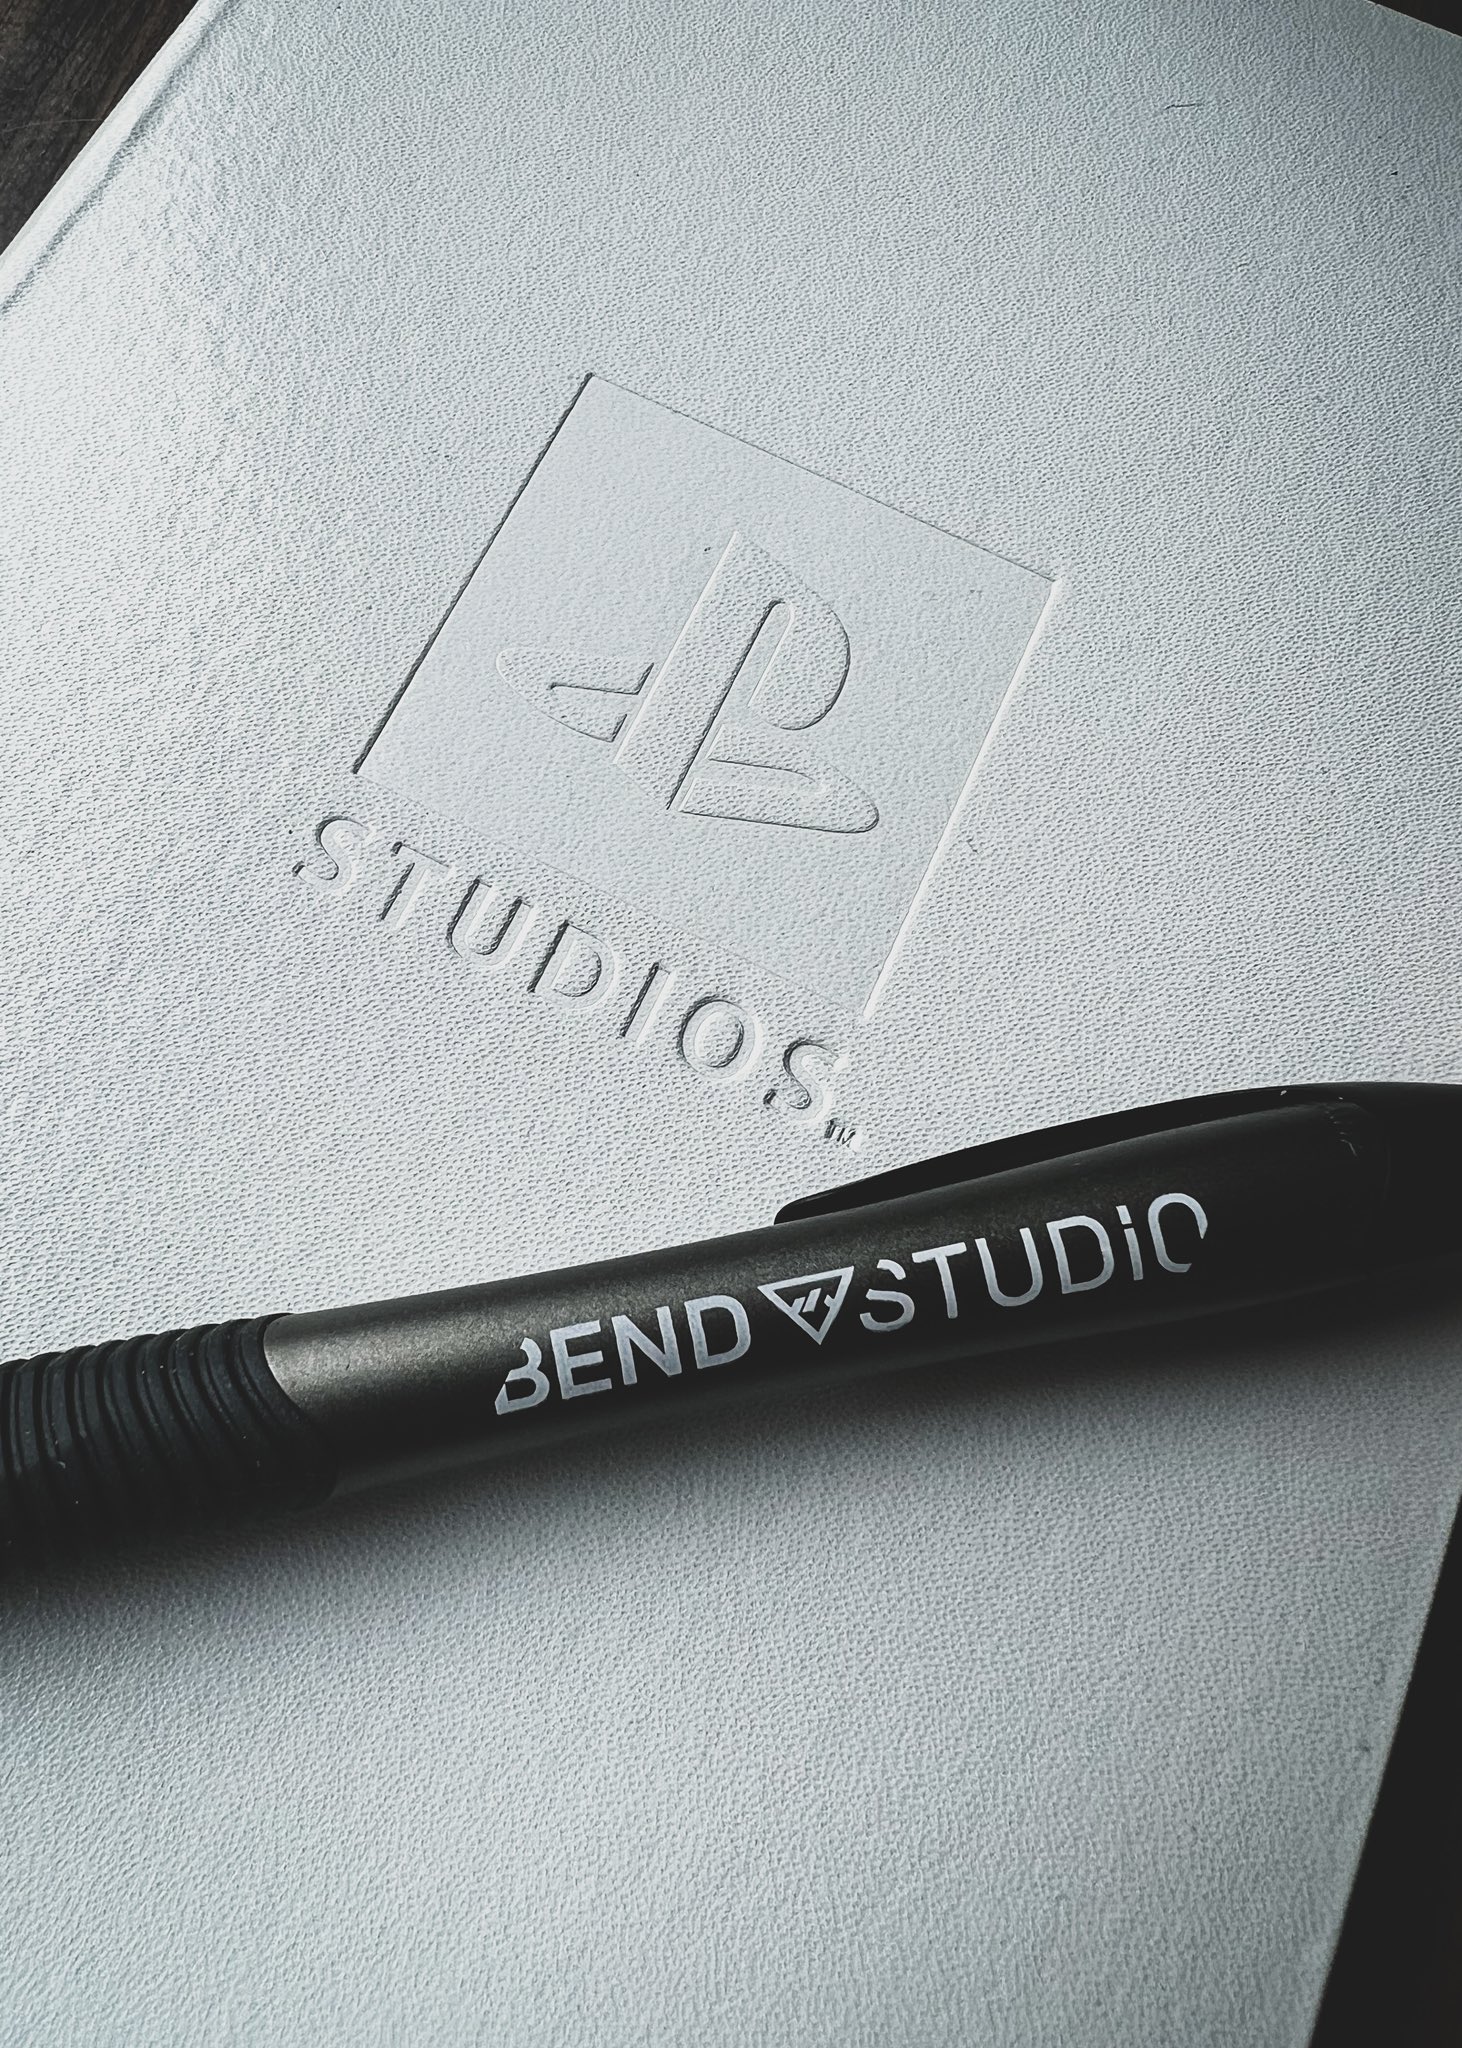 Bend Studio Seemingly Teasing New Game - PlayStation LifeStyle